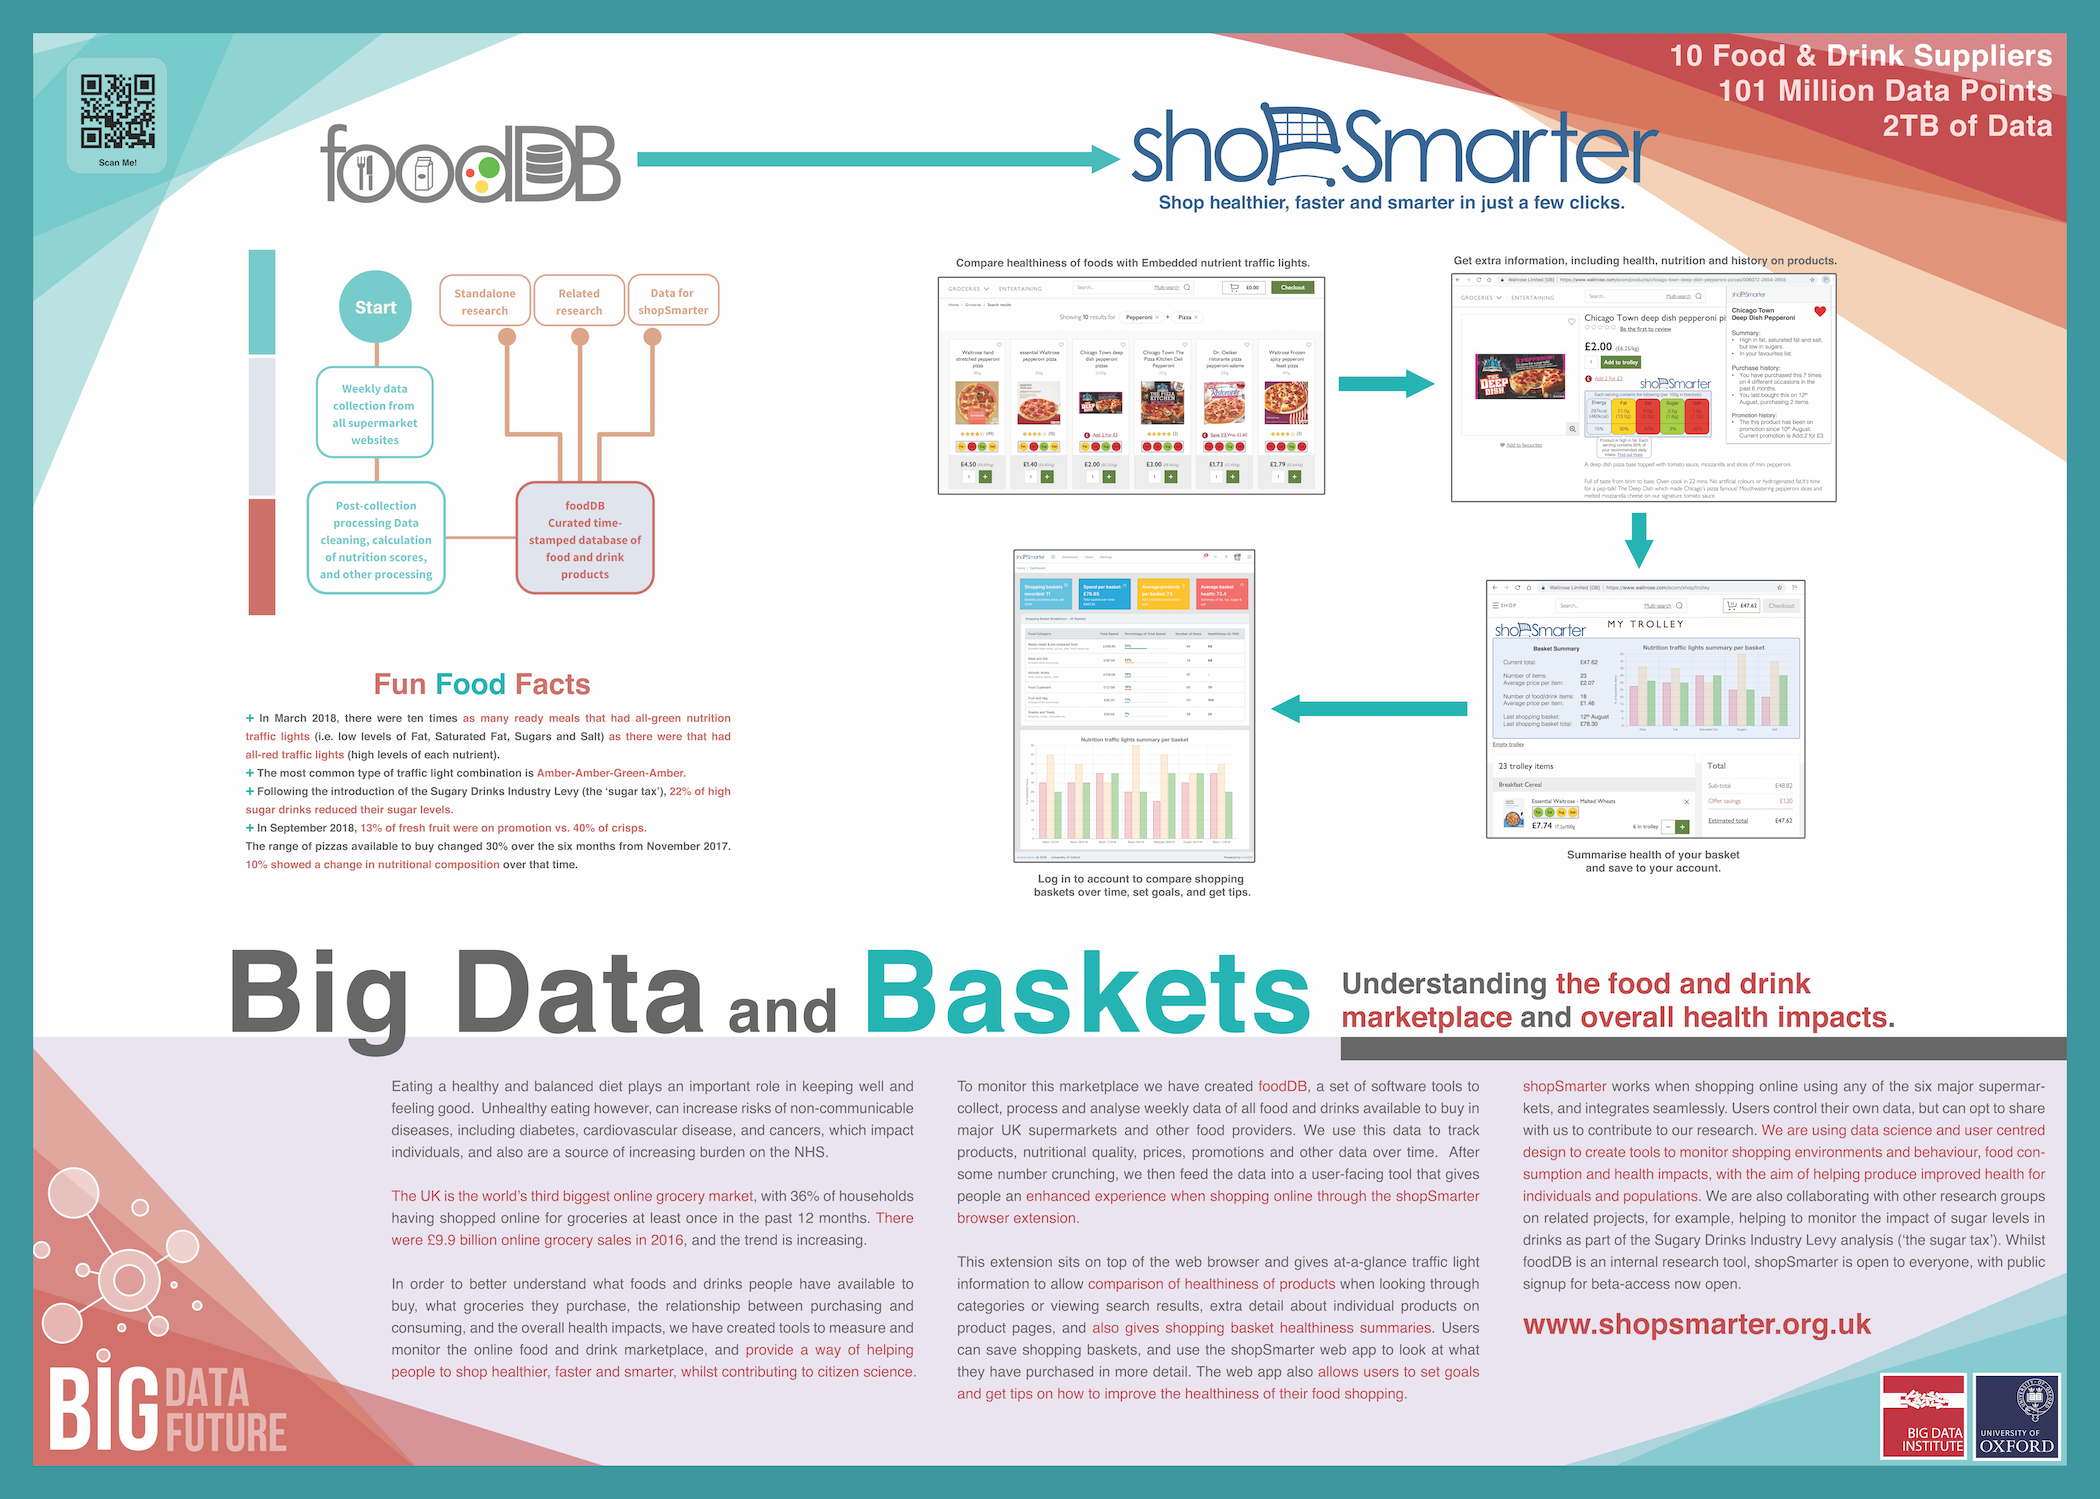 Big Data In Your Basket